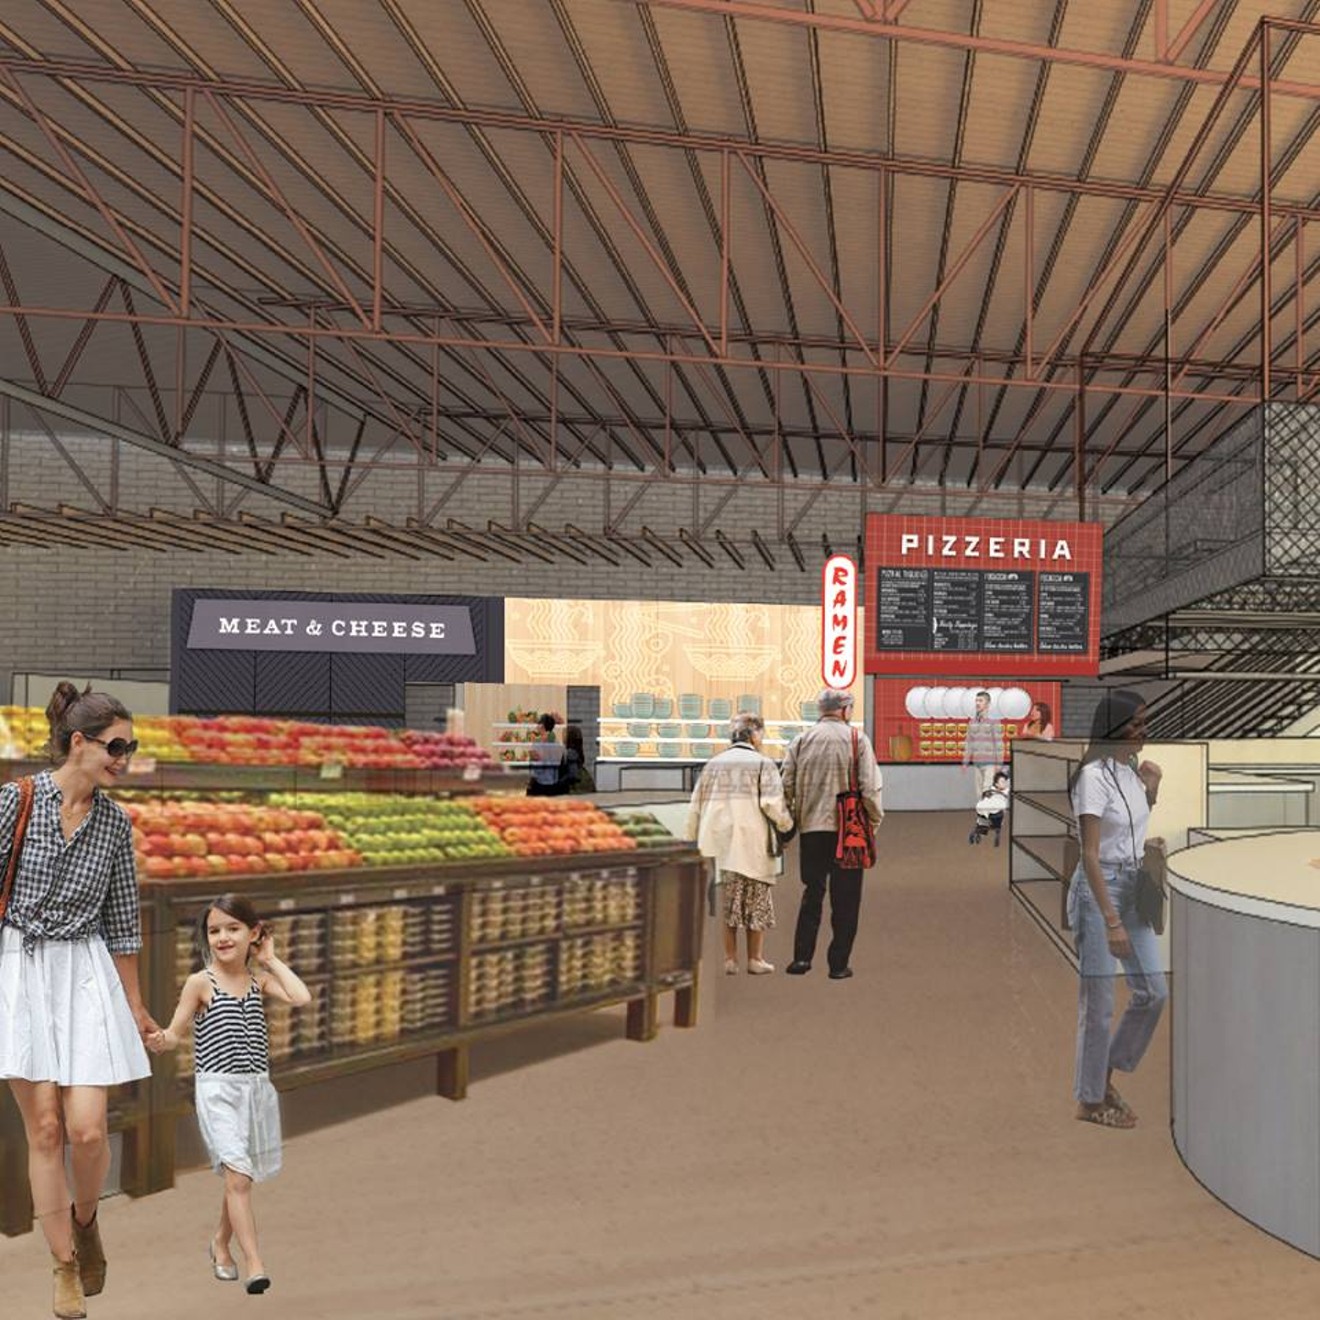 North Denver residents will soon be able to shop at Leevers Locavore.